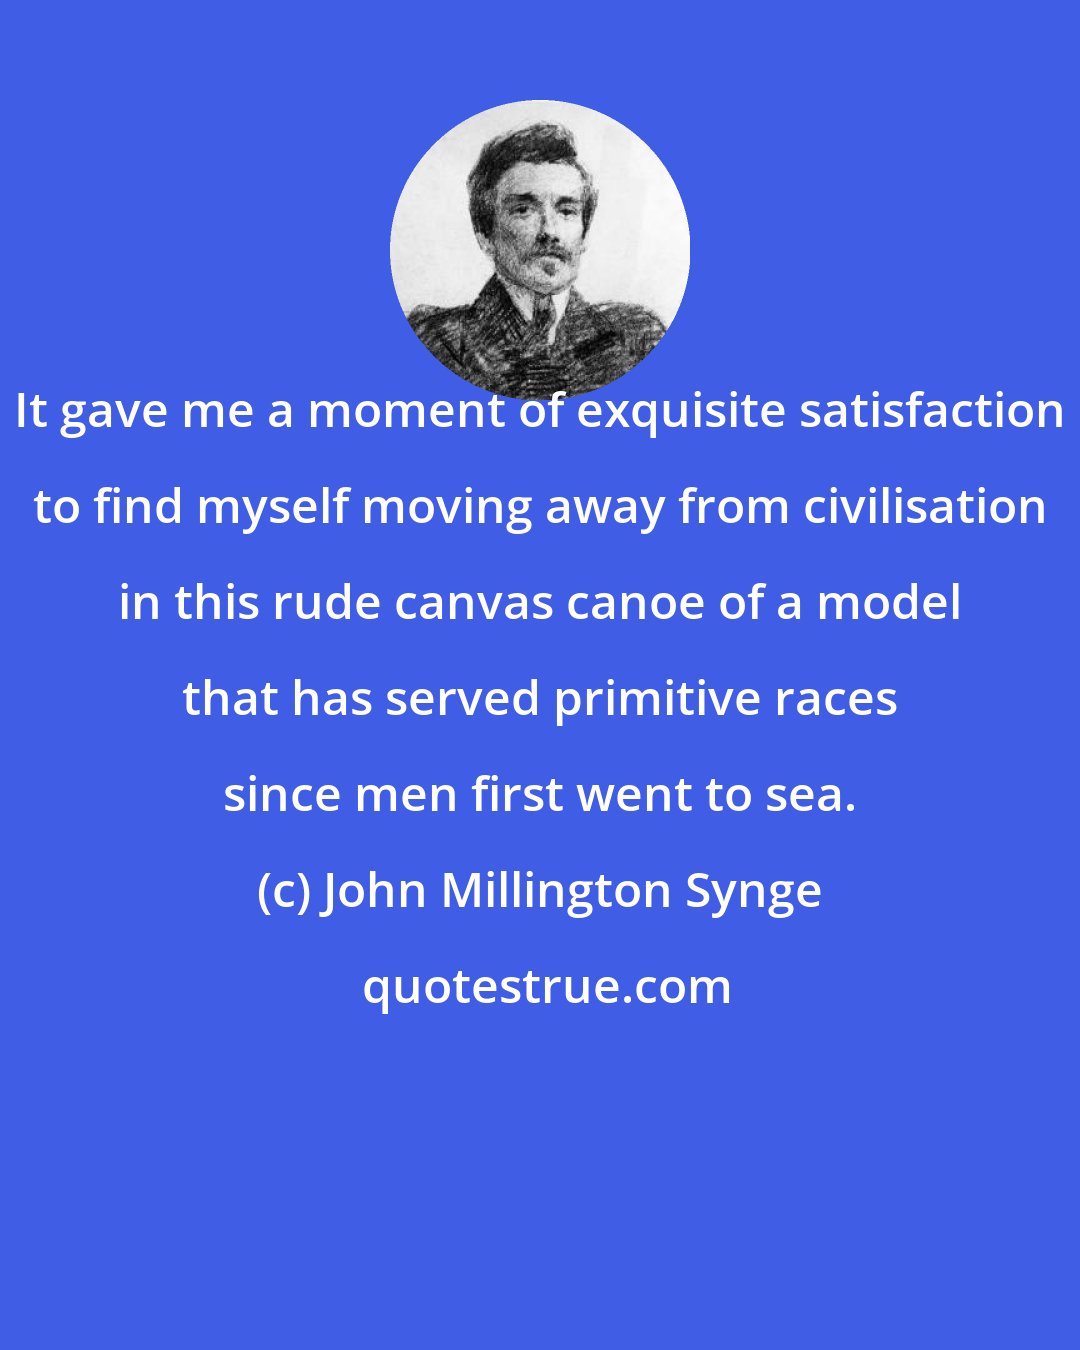 John Millington Synge: It gave me a moment of exquisite satisfaction to find myself moving away from civilisation in this rude canvas canoe of a model that has served primitive races since men first went to sea.